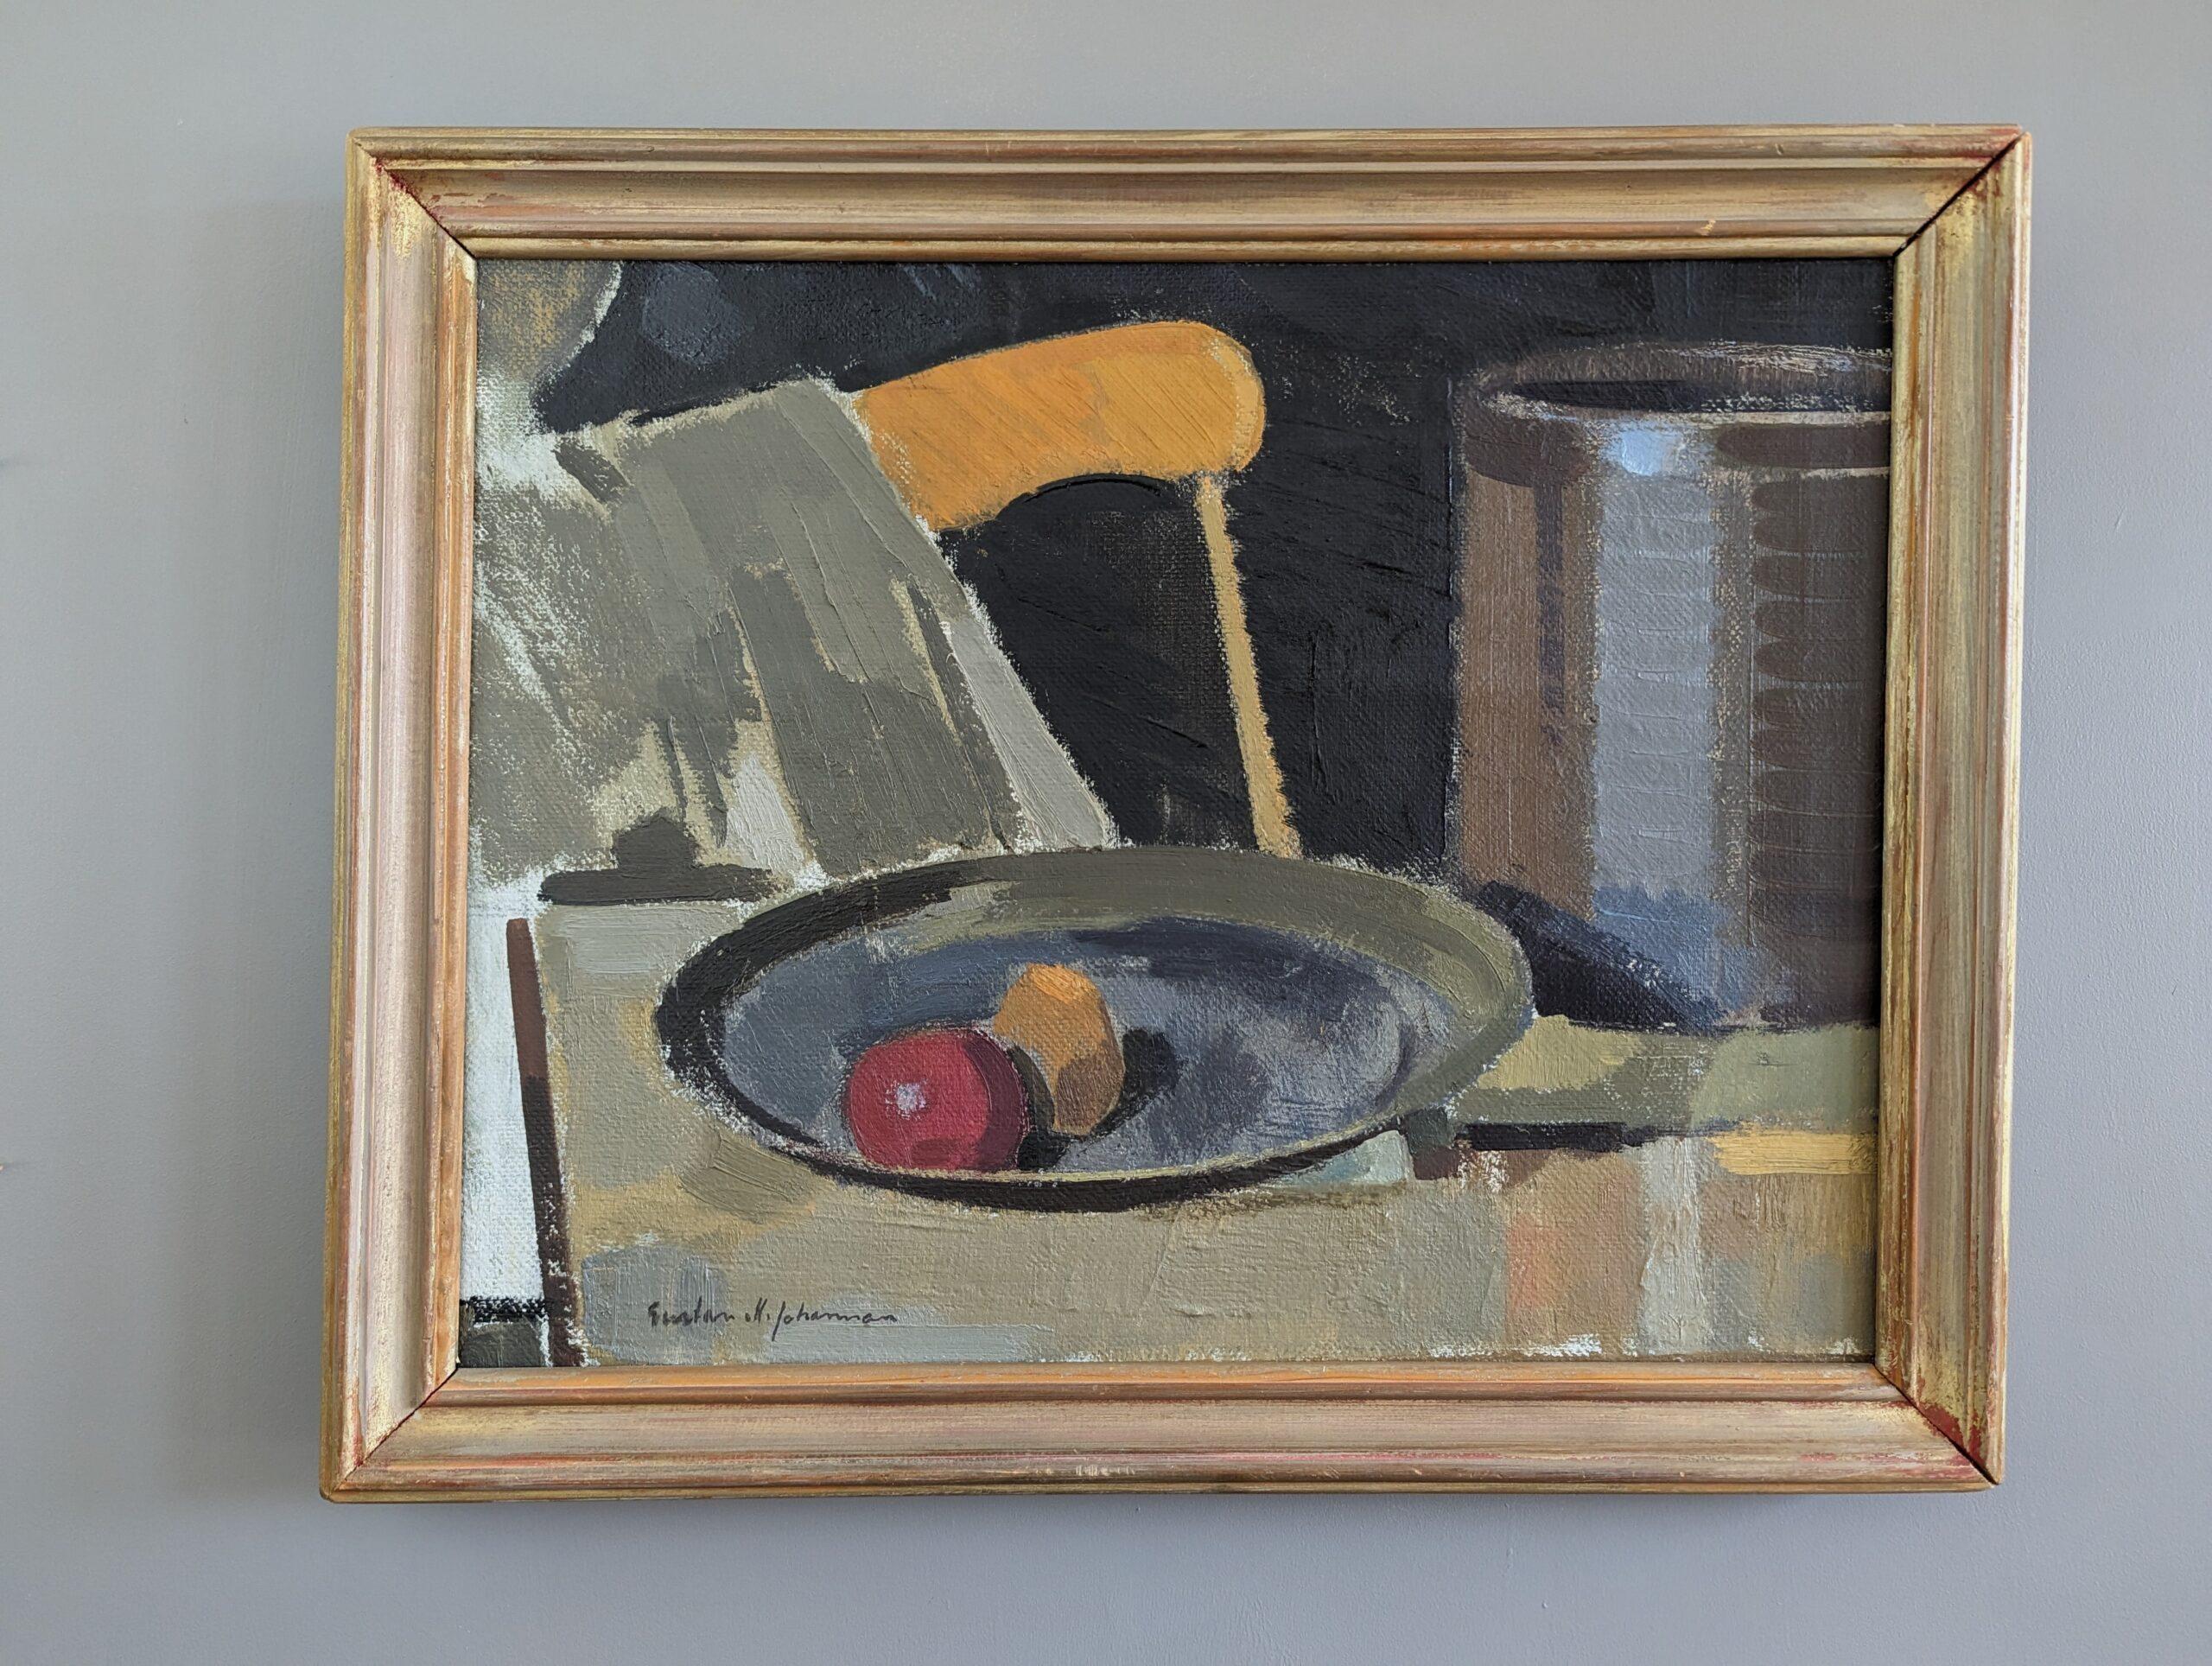 EXPECT
Size: 43 x 53 cm (including frame)
Oil on Canvas 

A mid-century modernist style interior still life painting that captures a moment of tranquil elegance, executed in oil onto canvas.

Centered on a table rests a plate of fruit, featuring a